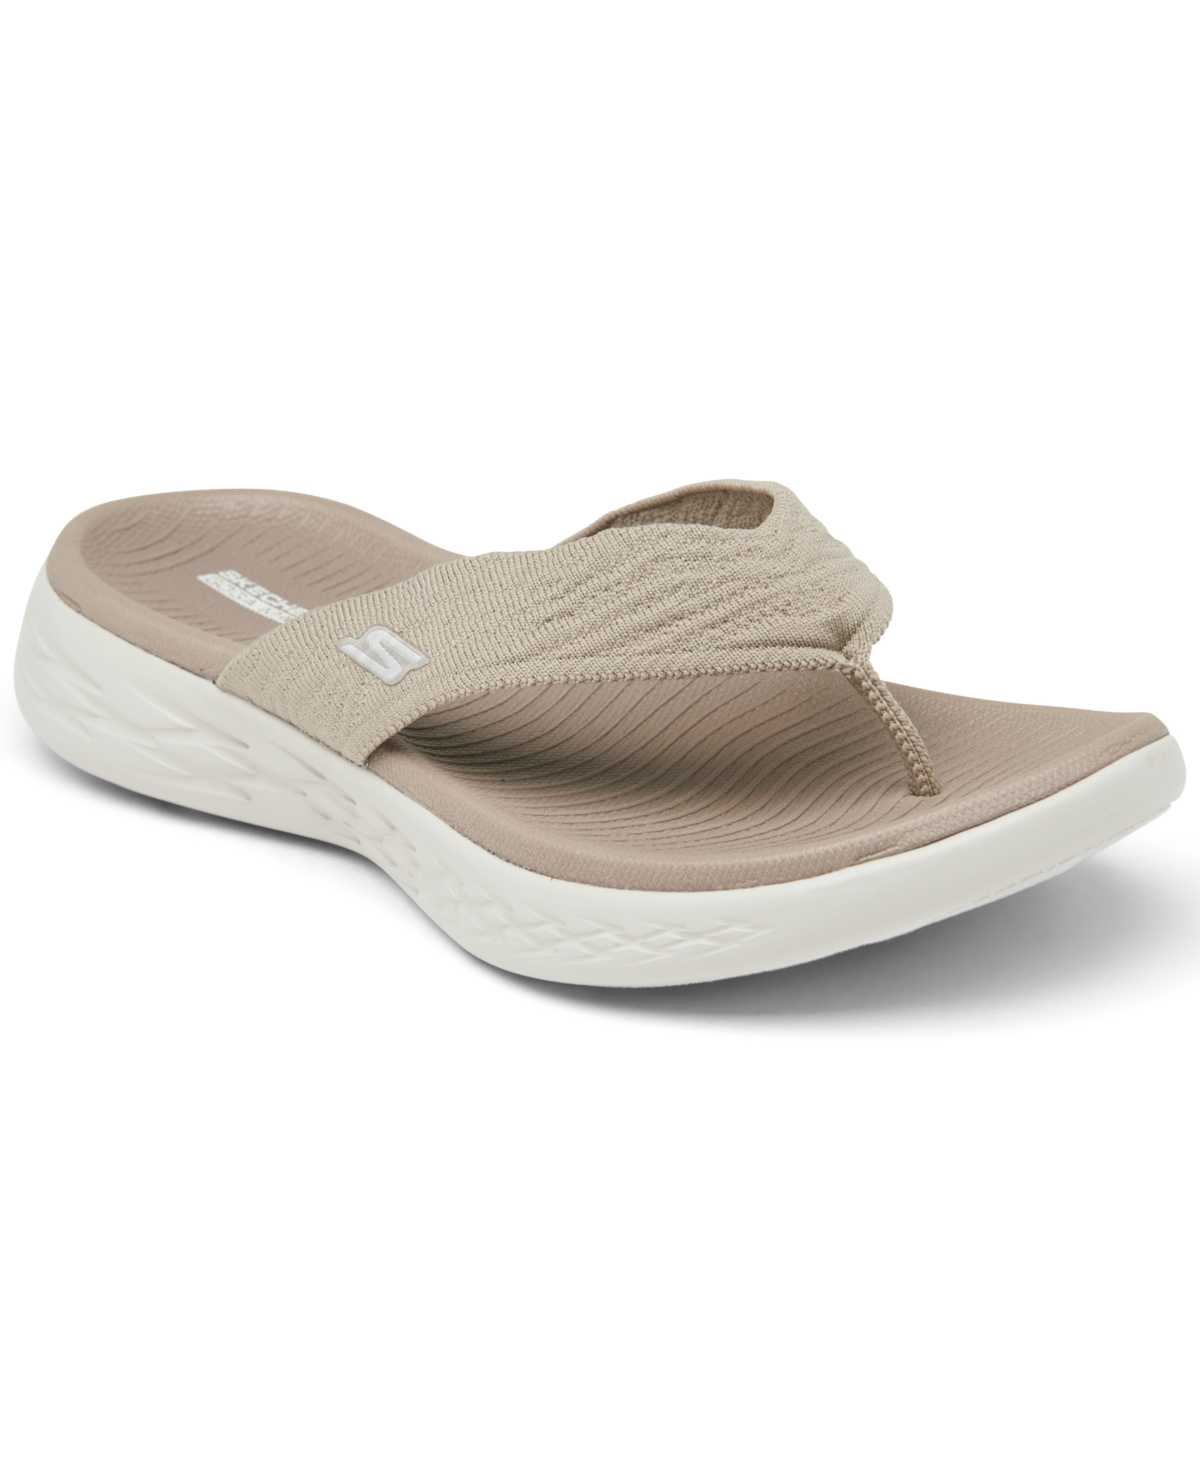 Skechers Women's On The Go 600 Sunny Athletic Flip Flop Thong Sandals from Finish Reviews - Finish Line Women's Shoes - - Macy's